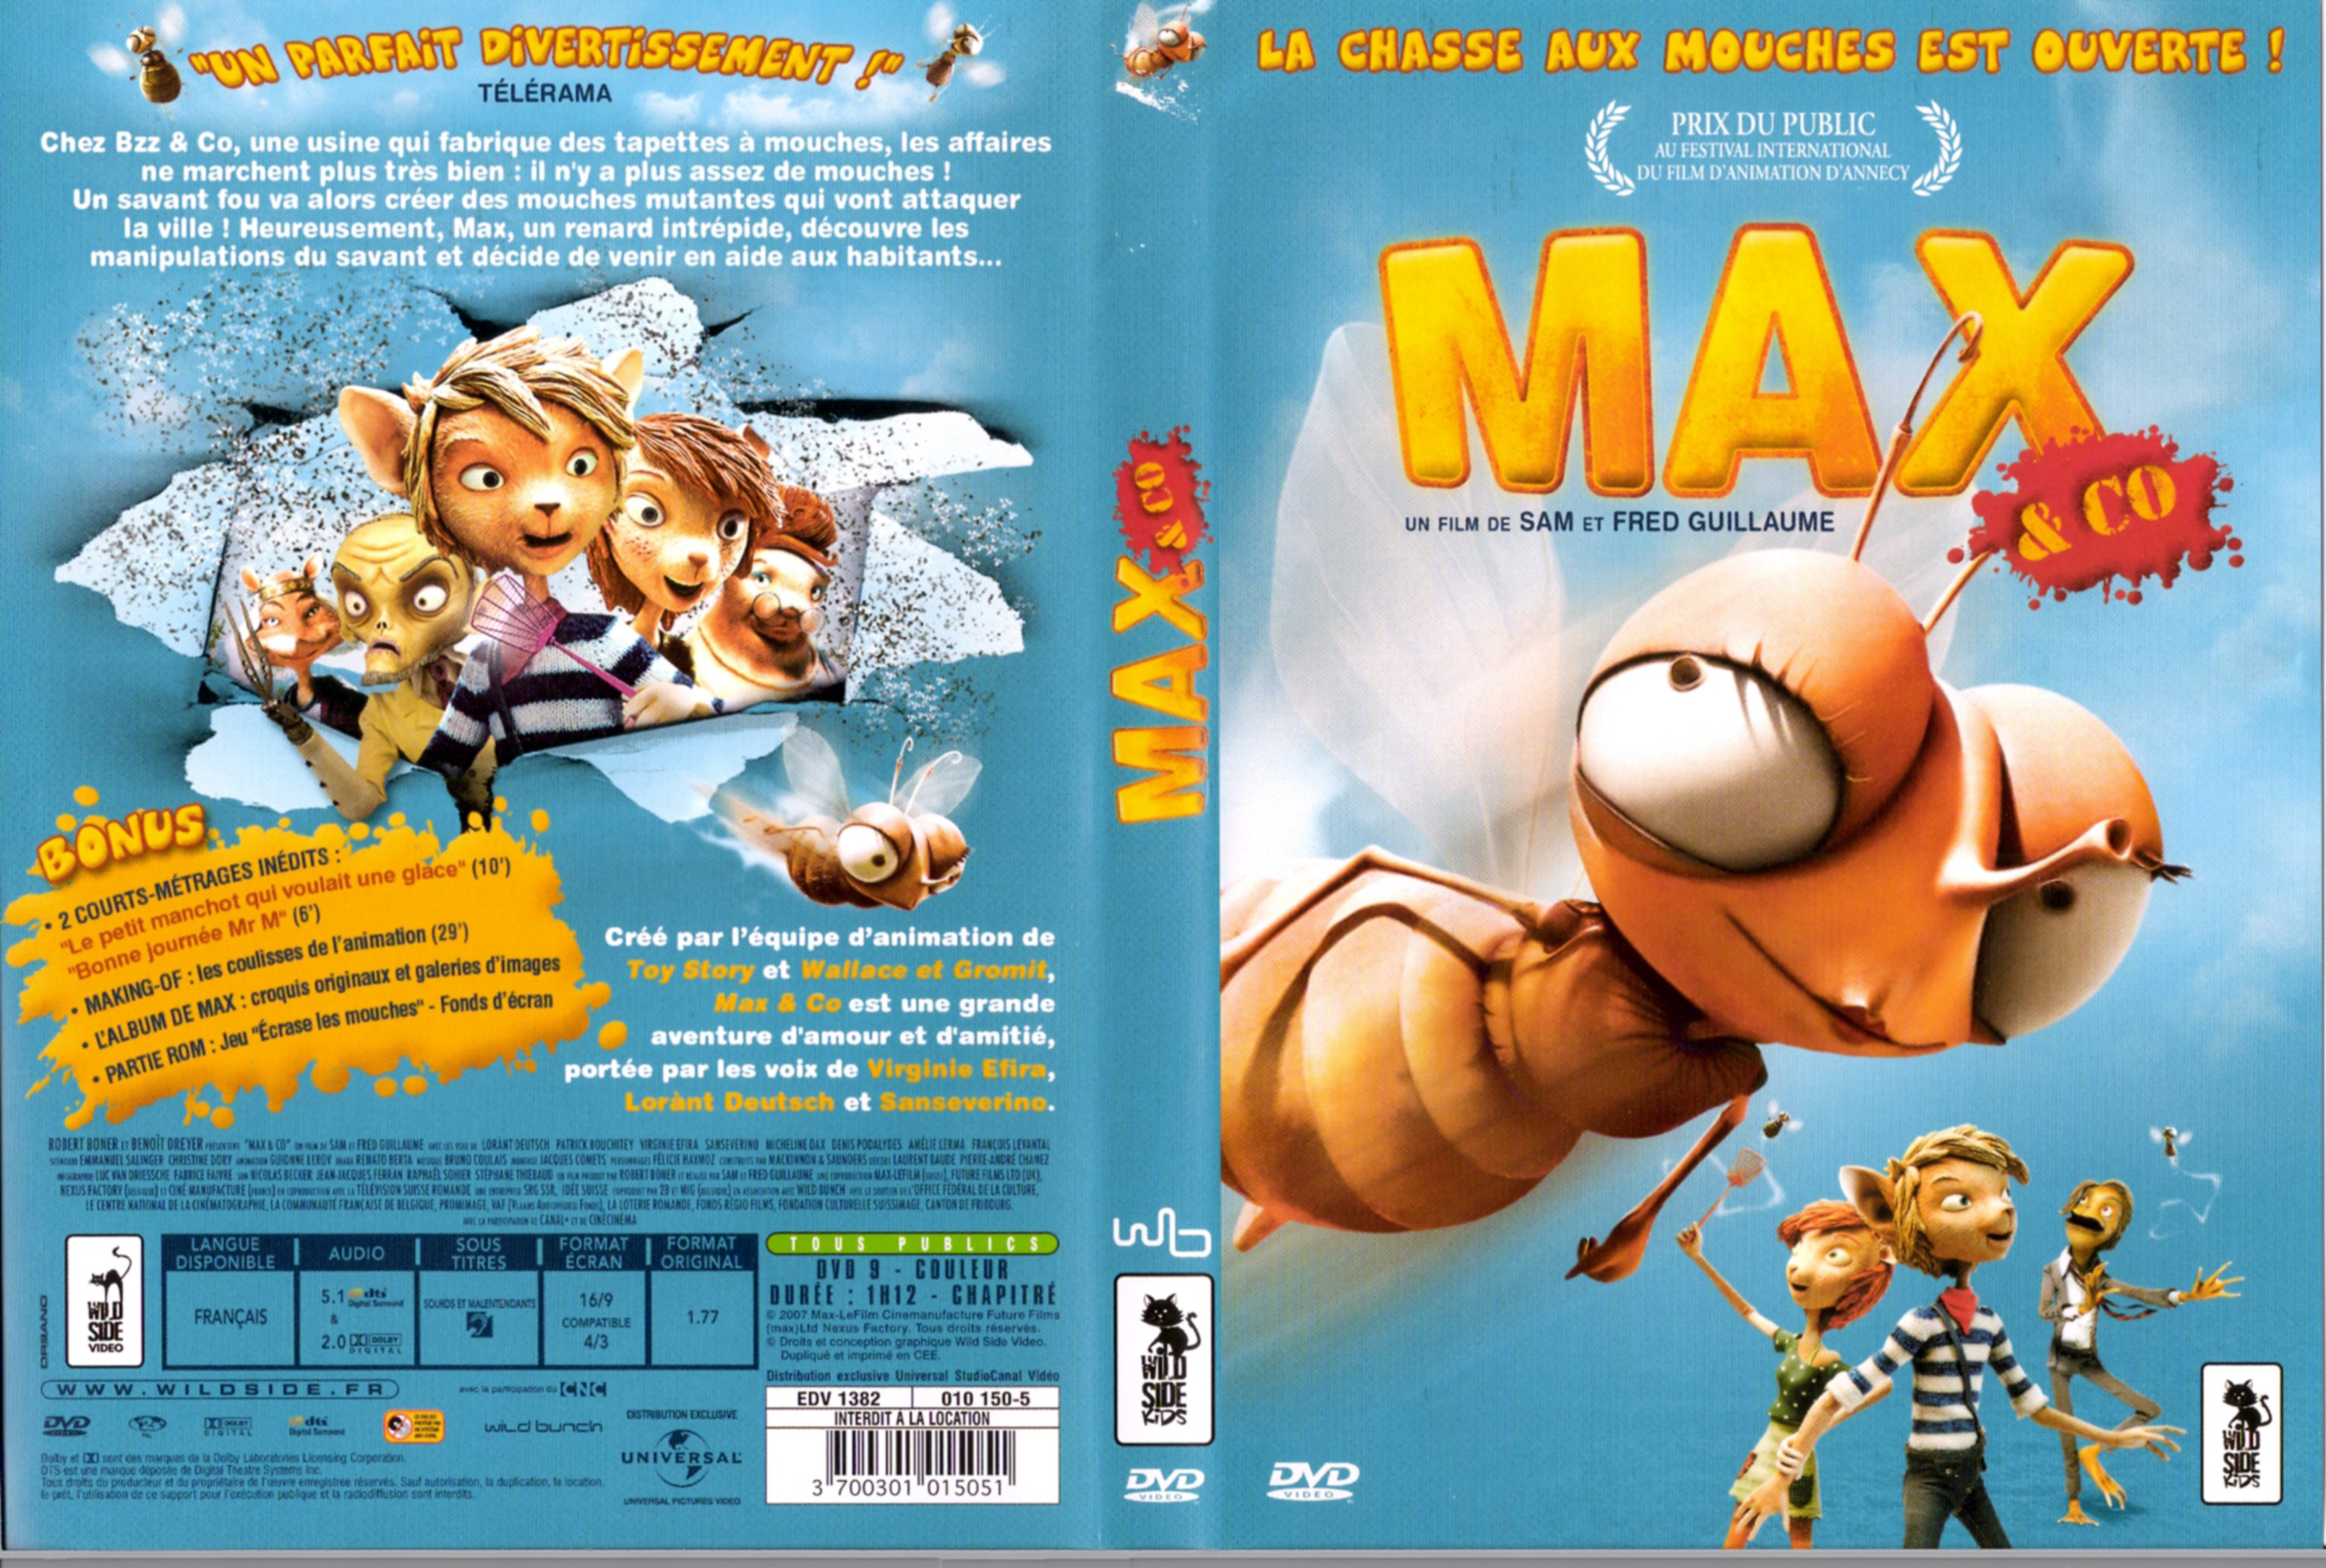 Jaquette DVD Max and co